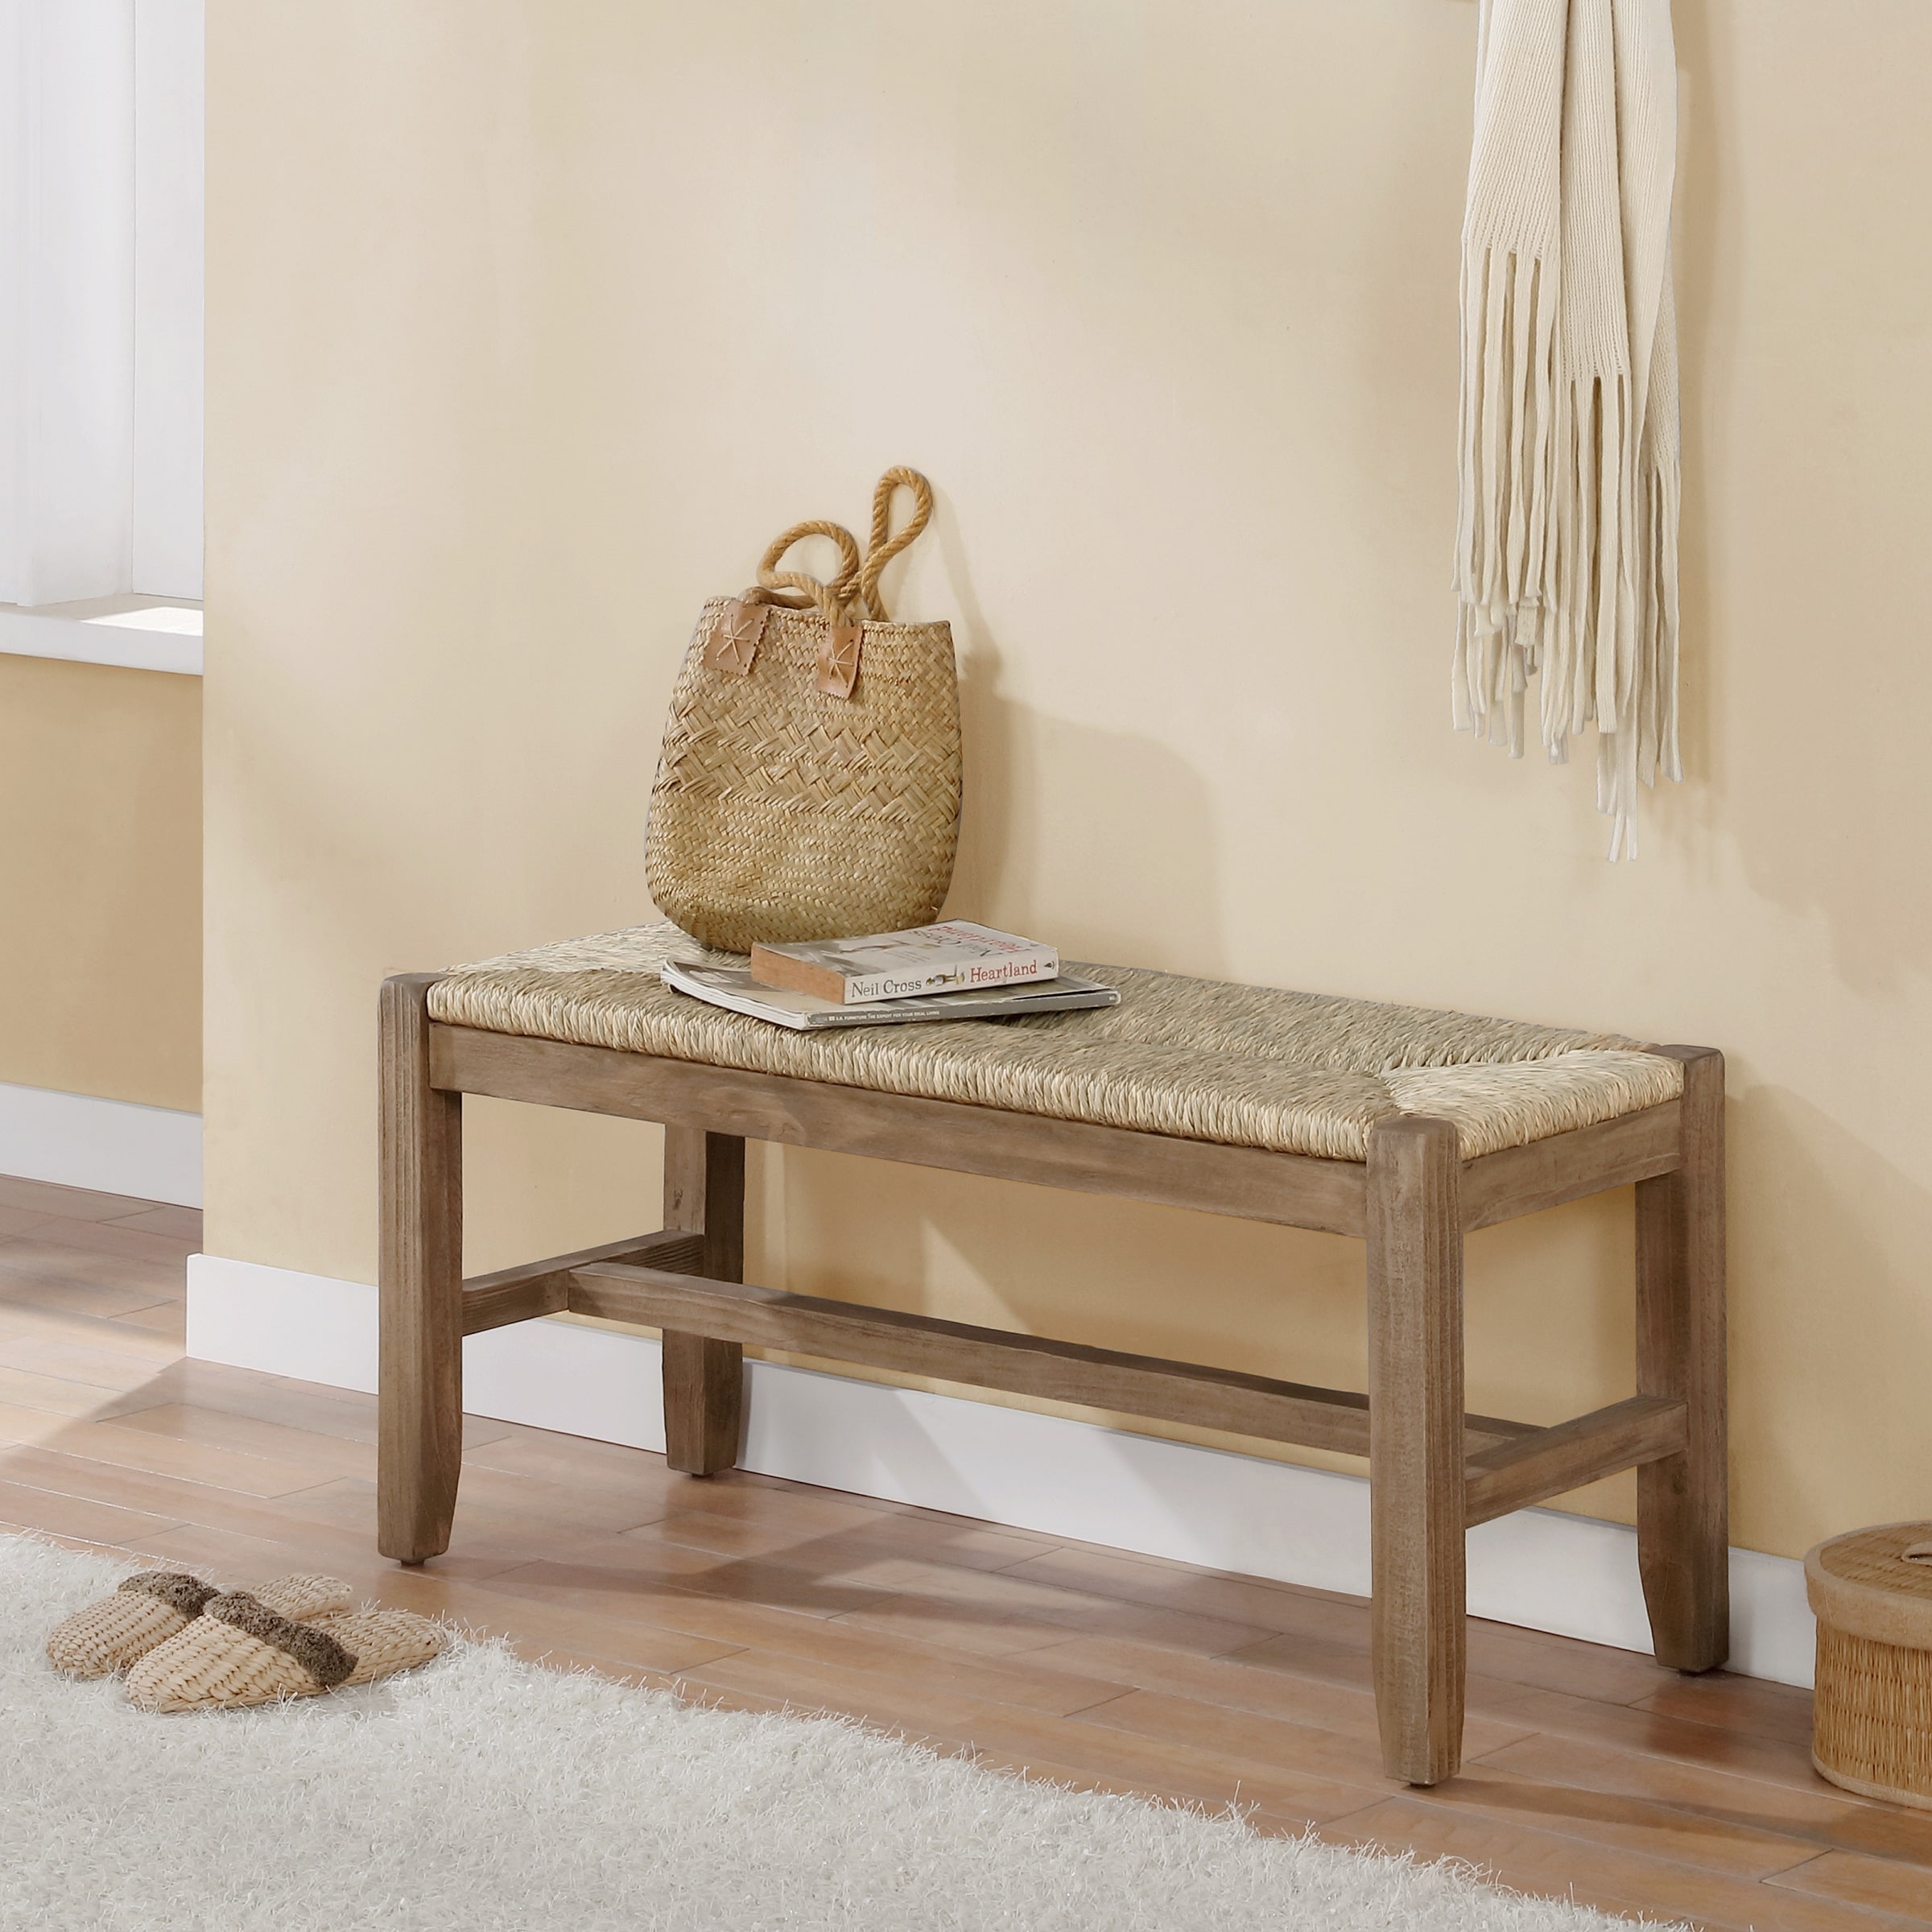 The Gray Barn Enchanted Acre 40-inch Wood Bench with Rush Seat